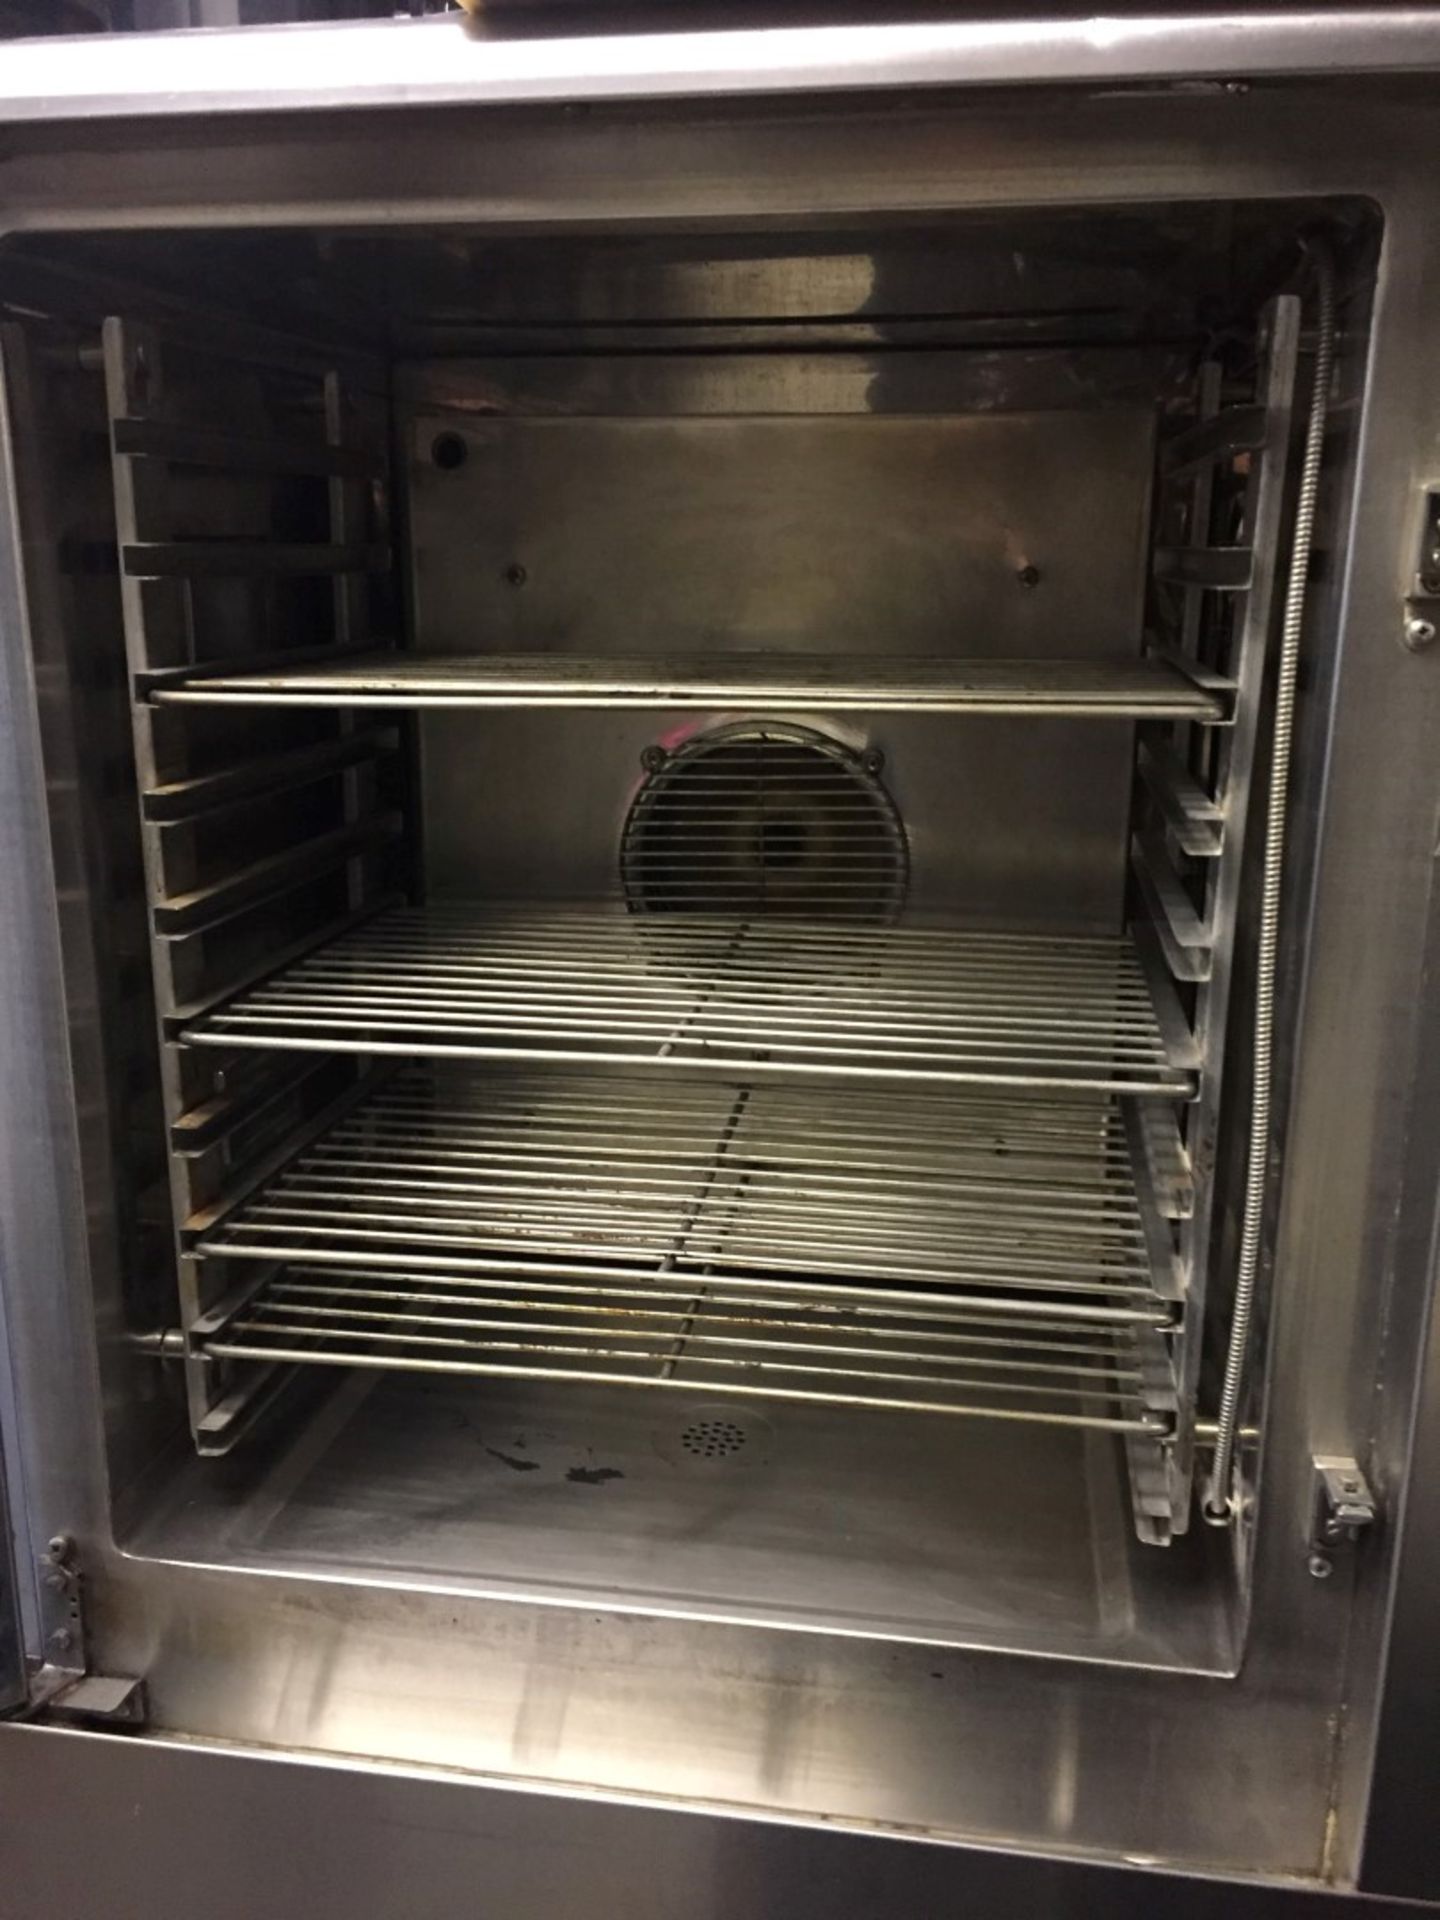 1 x Falcon CONVECTASTEAM-10 Commercial Convection Oven With Stand (Model: E4103TC) - Phase 3 - - Image 10 of 17